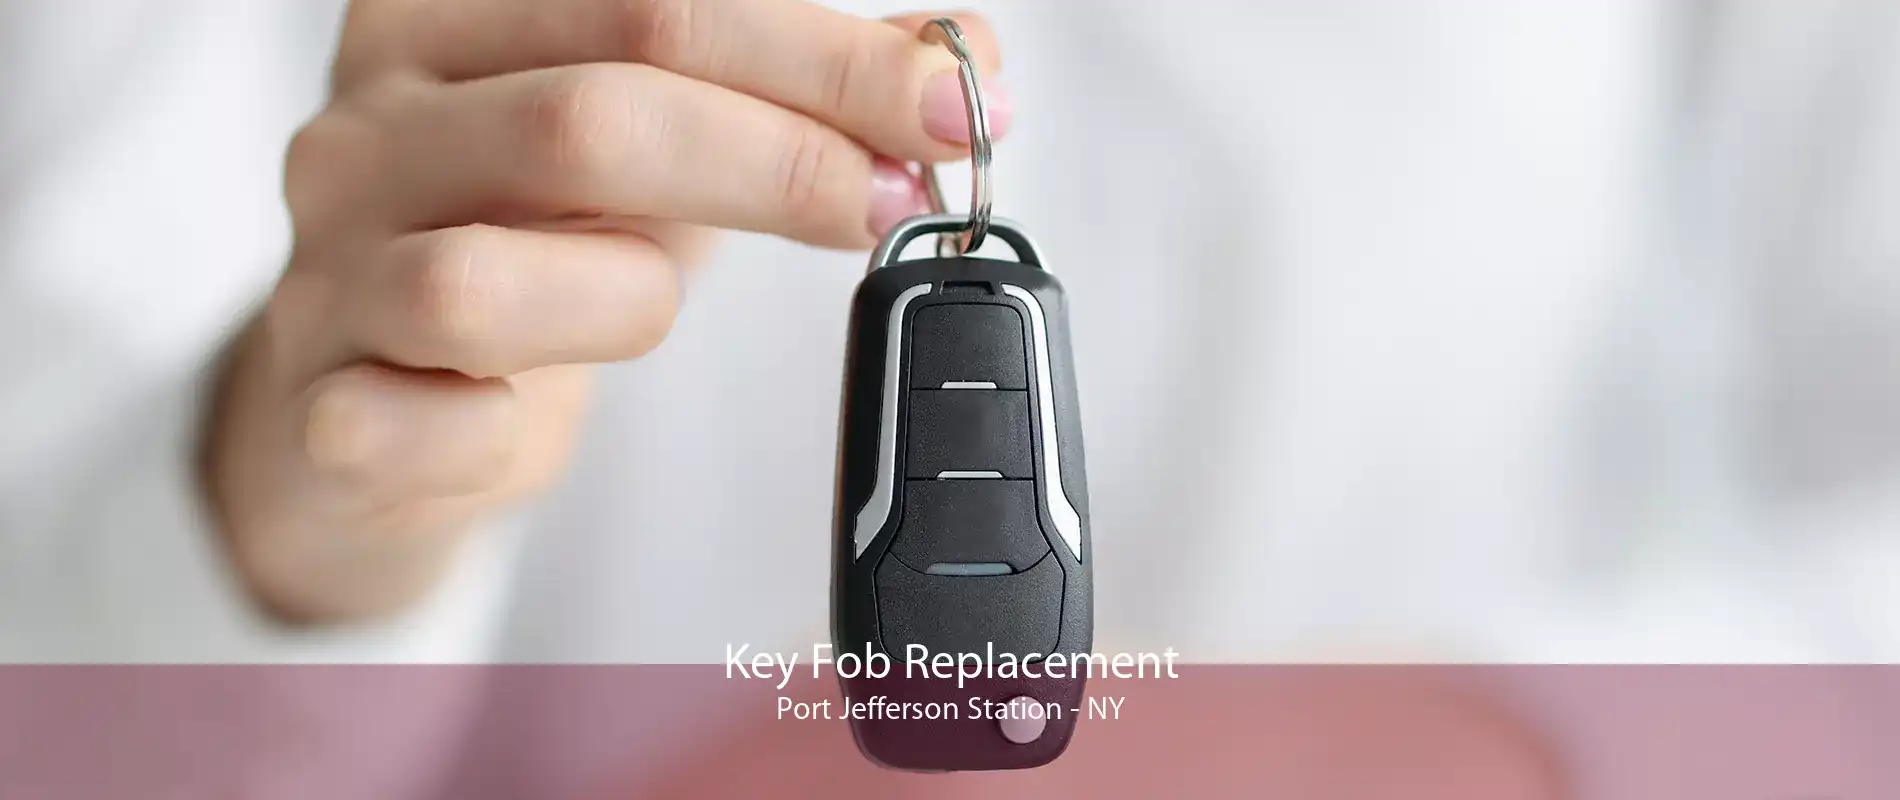 Key Fob Replacement Port Jefferson Station - NY